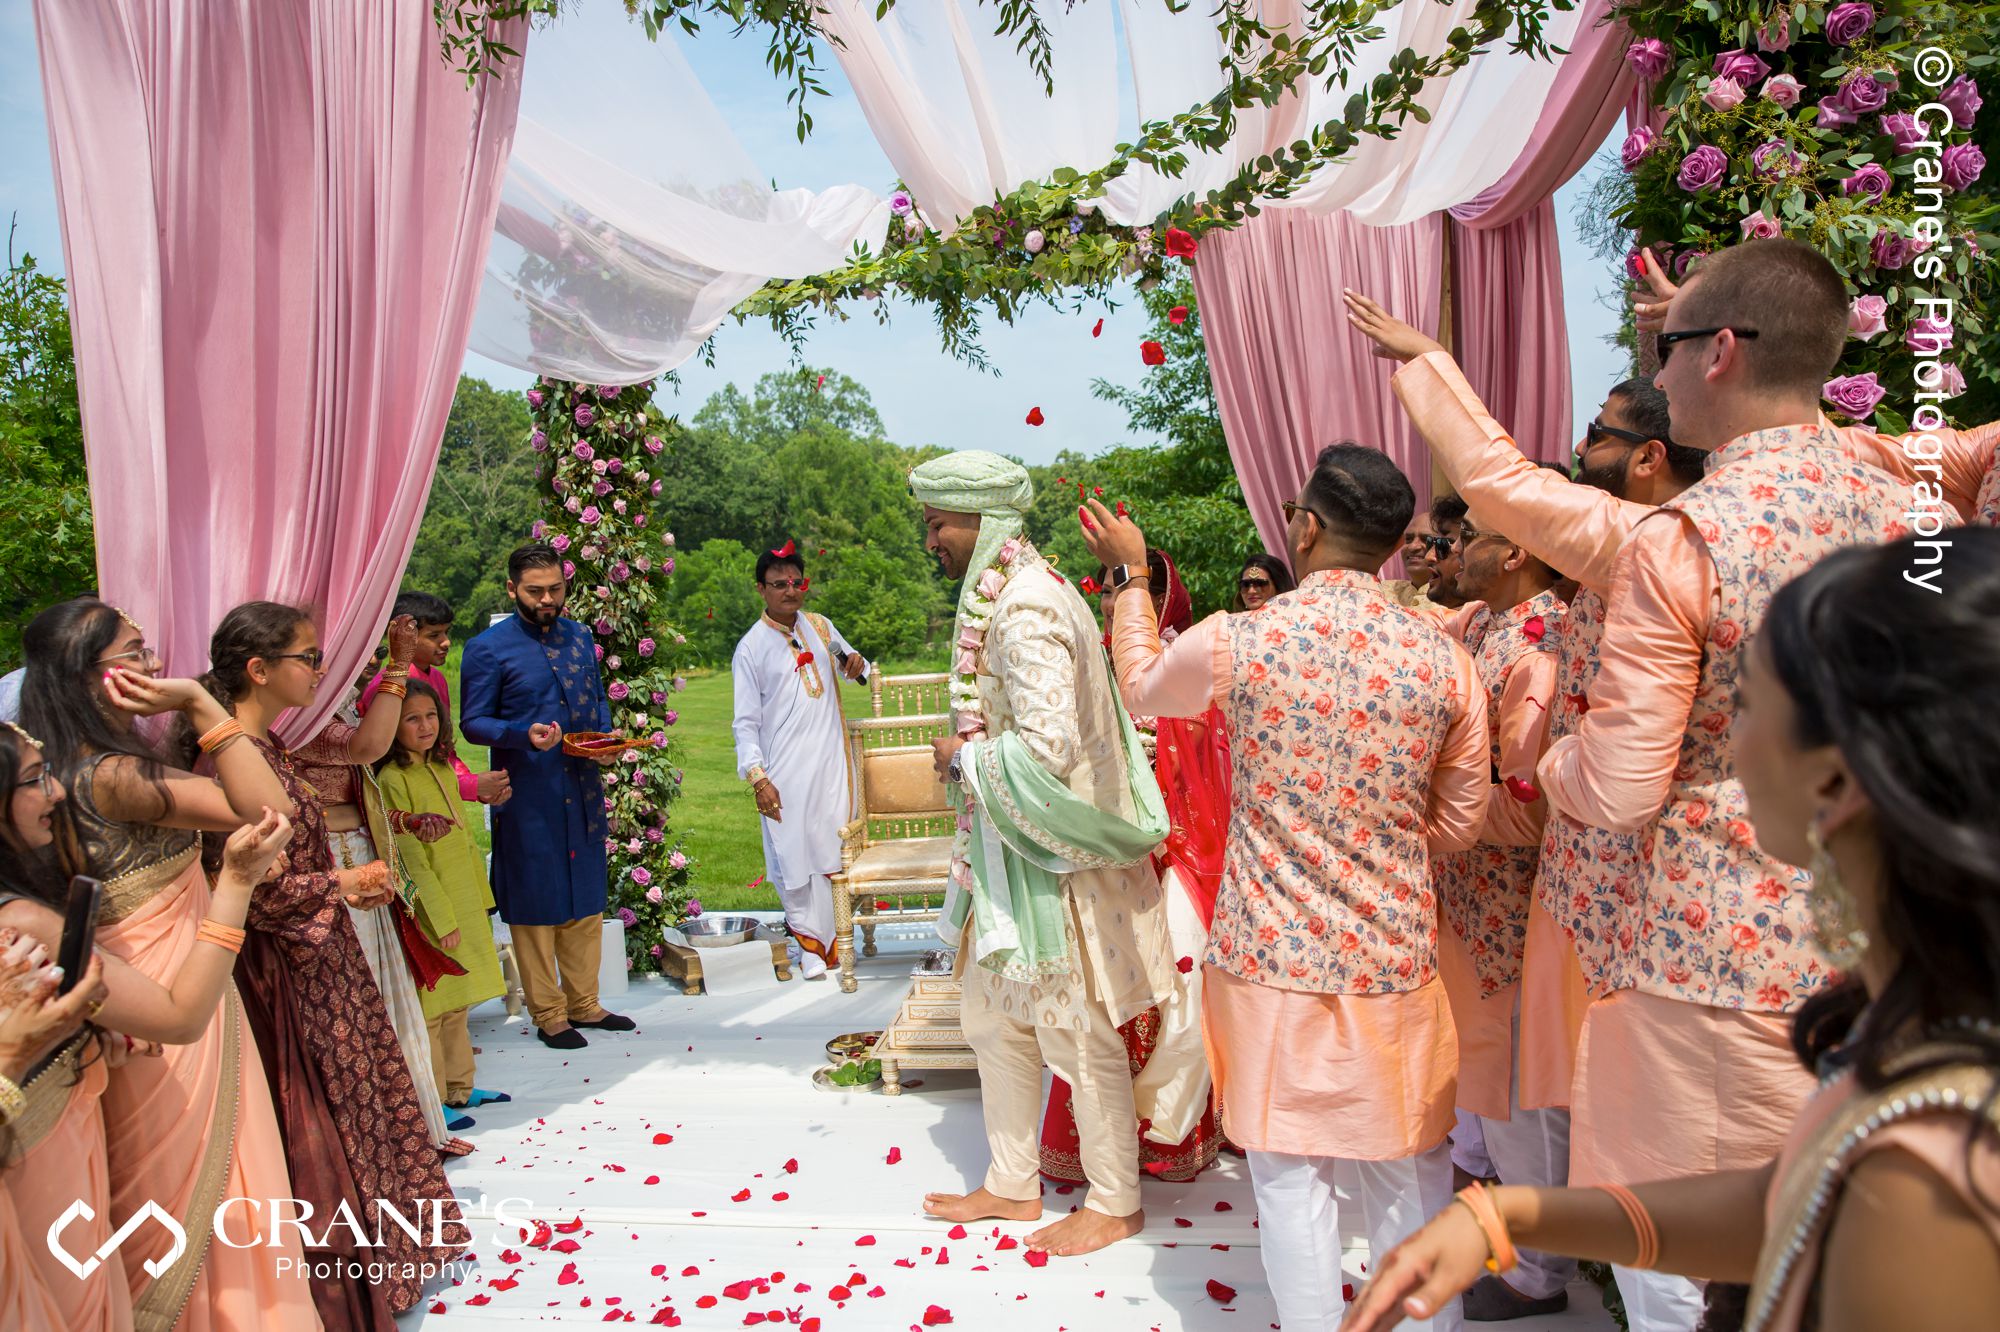 Wedding party and family send blessing to an Indian bride and groom at their outdoor wedding